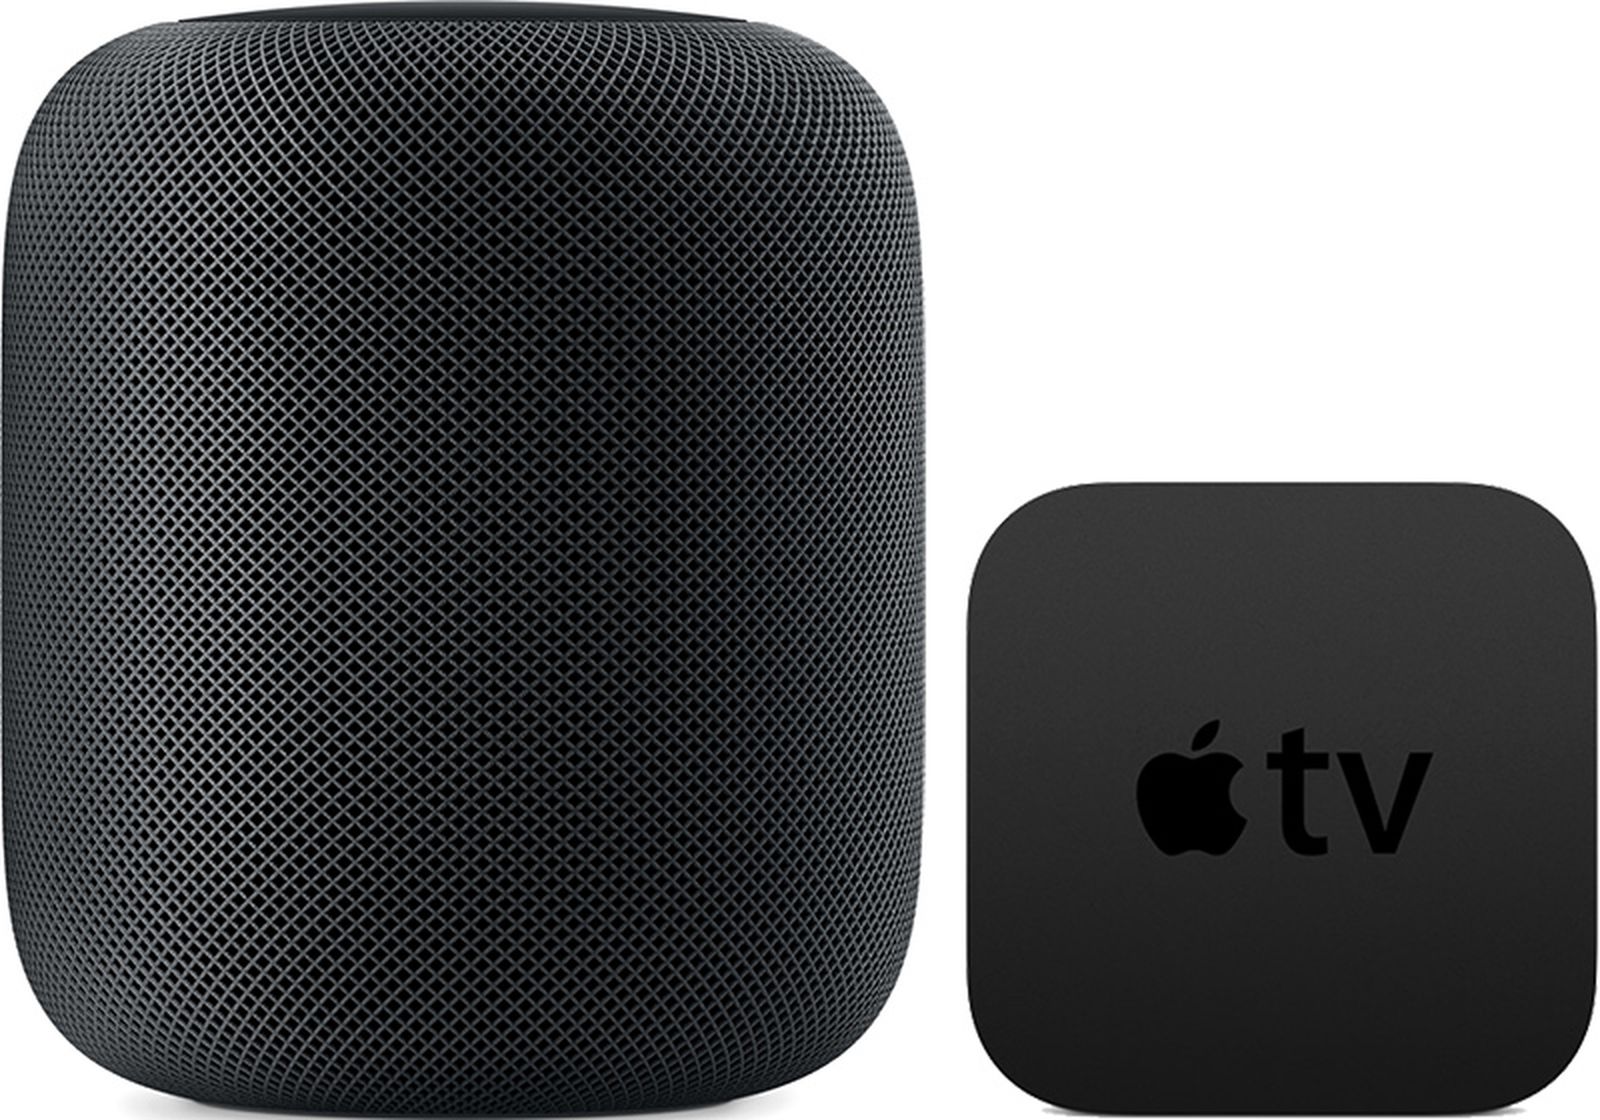 Should You Use HomePod Minis With Your Apple TV 4K?